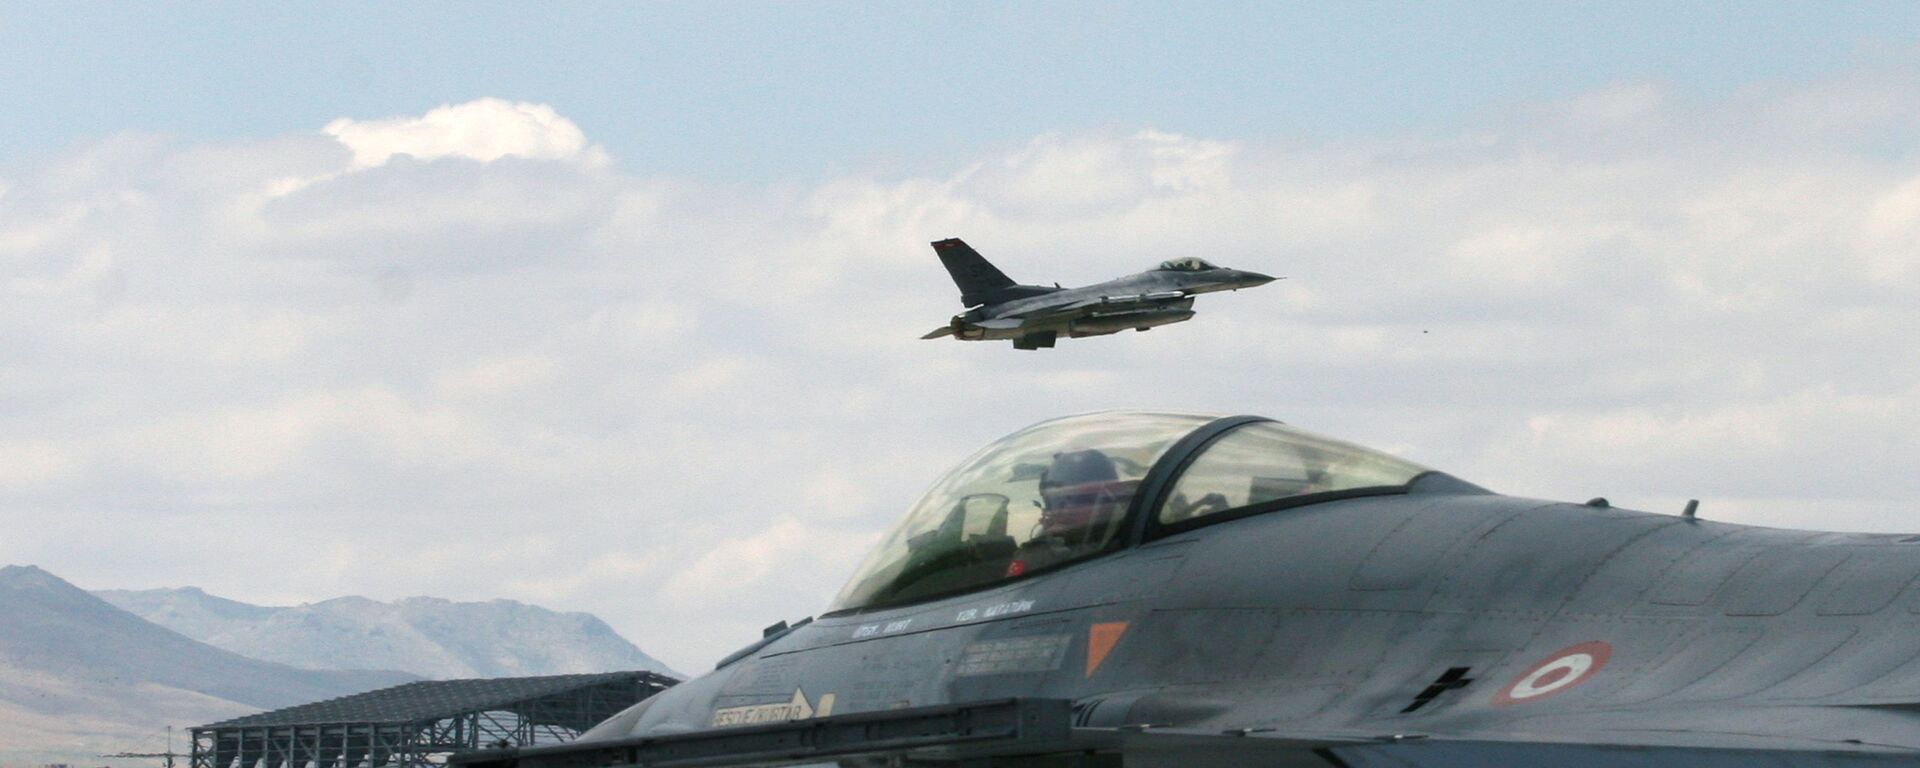 A Turkish F-16 prepares to taxi while another one takes off during Anatolian Eagle exercise at 3rd Main Jet Air Base near the central Anatolian city of Konya, Turkey, Monday, June 15, 2009 - Sputnik International, 1920, 12.10.2021